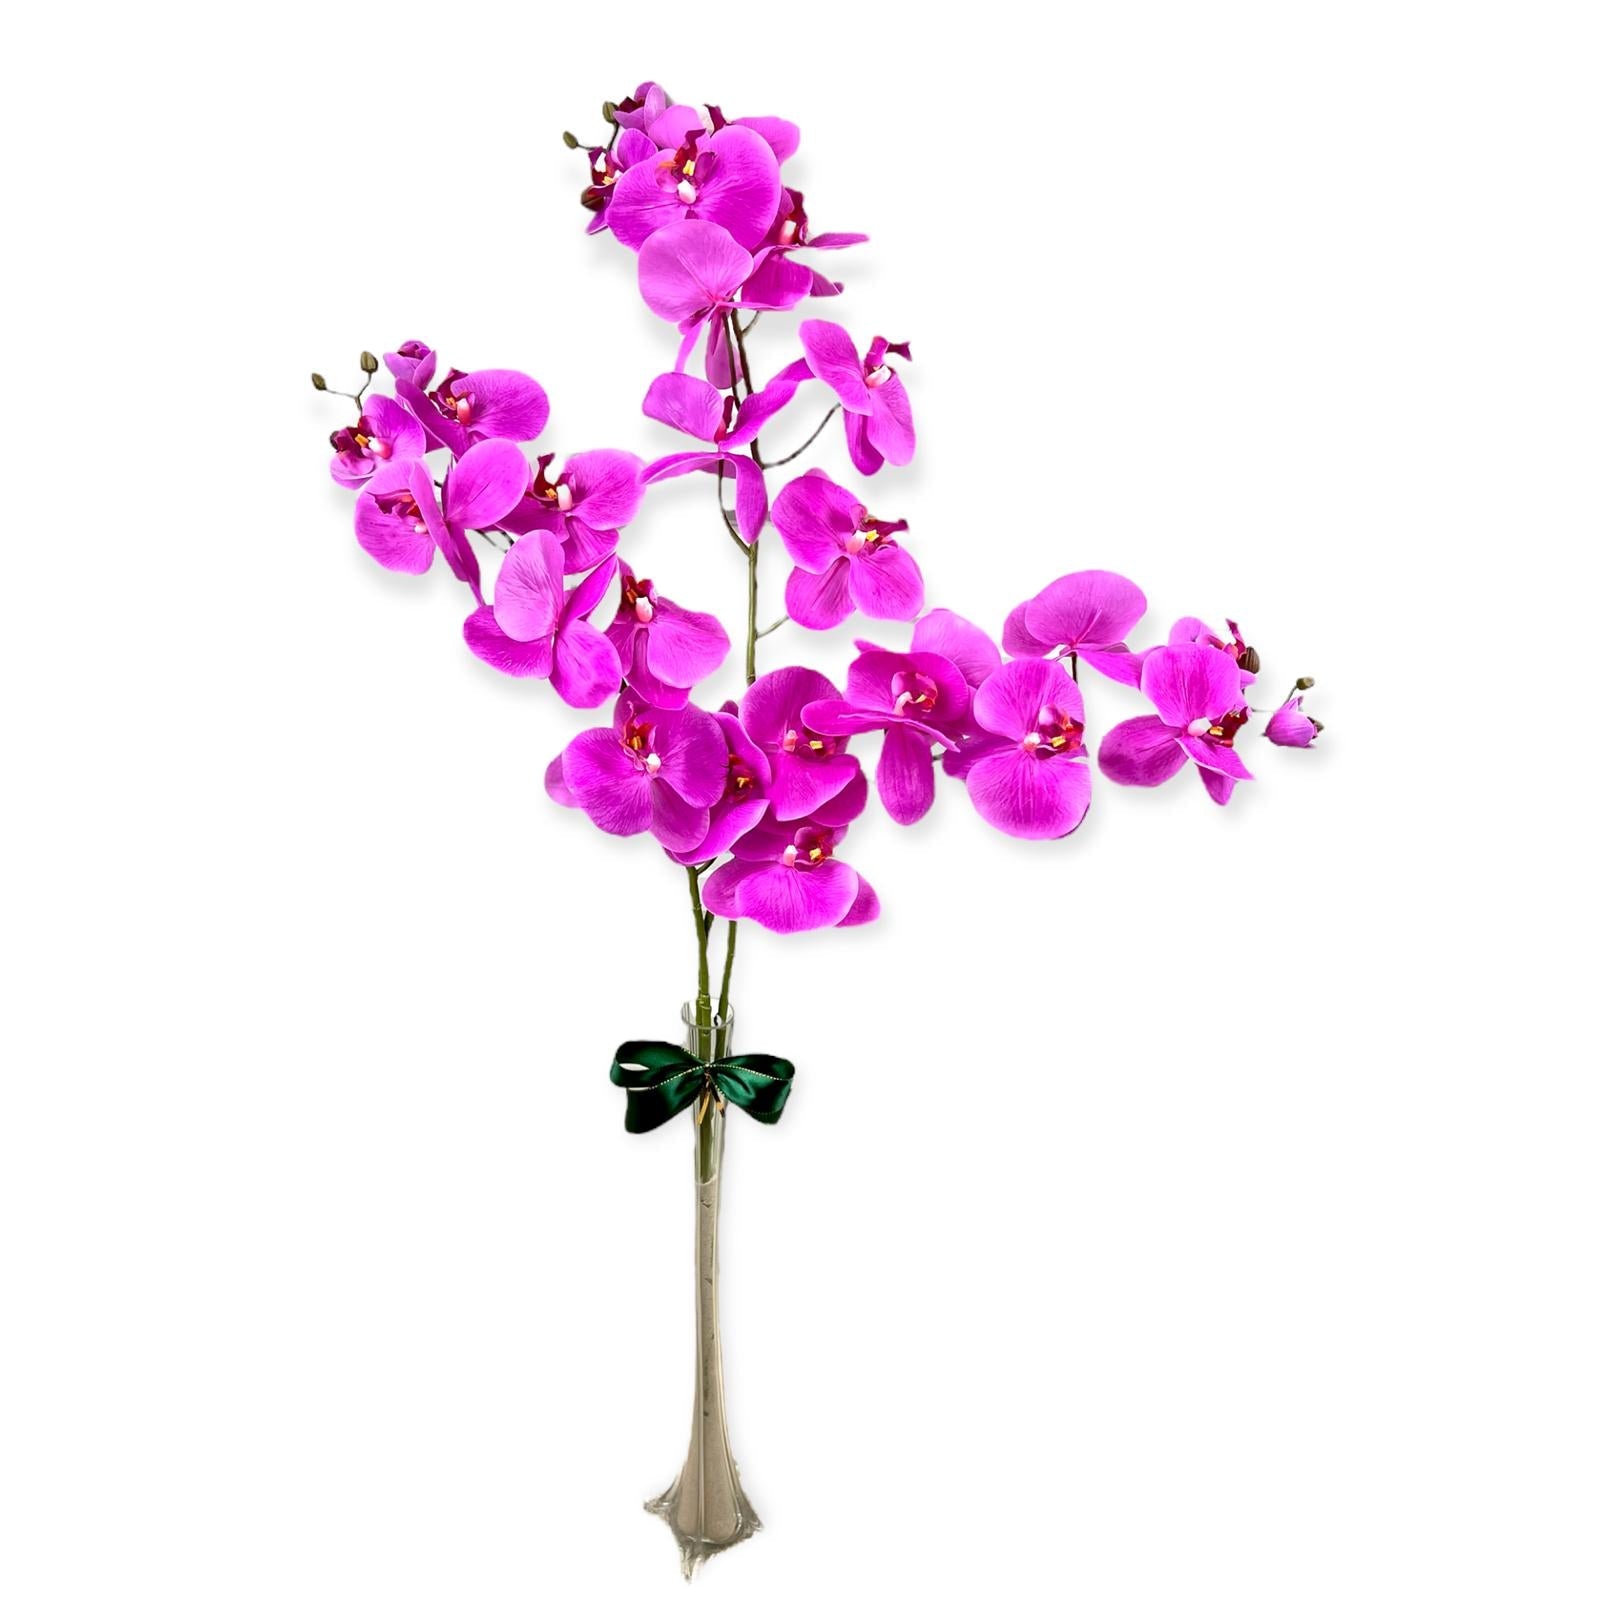 Stunning Orchids in Glass Vase